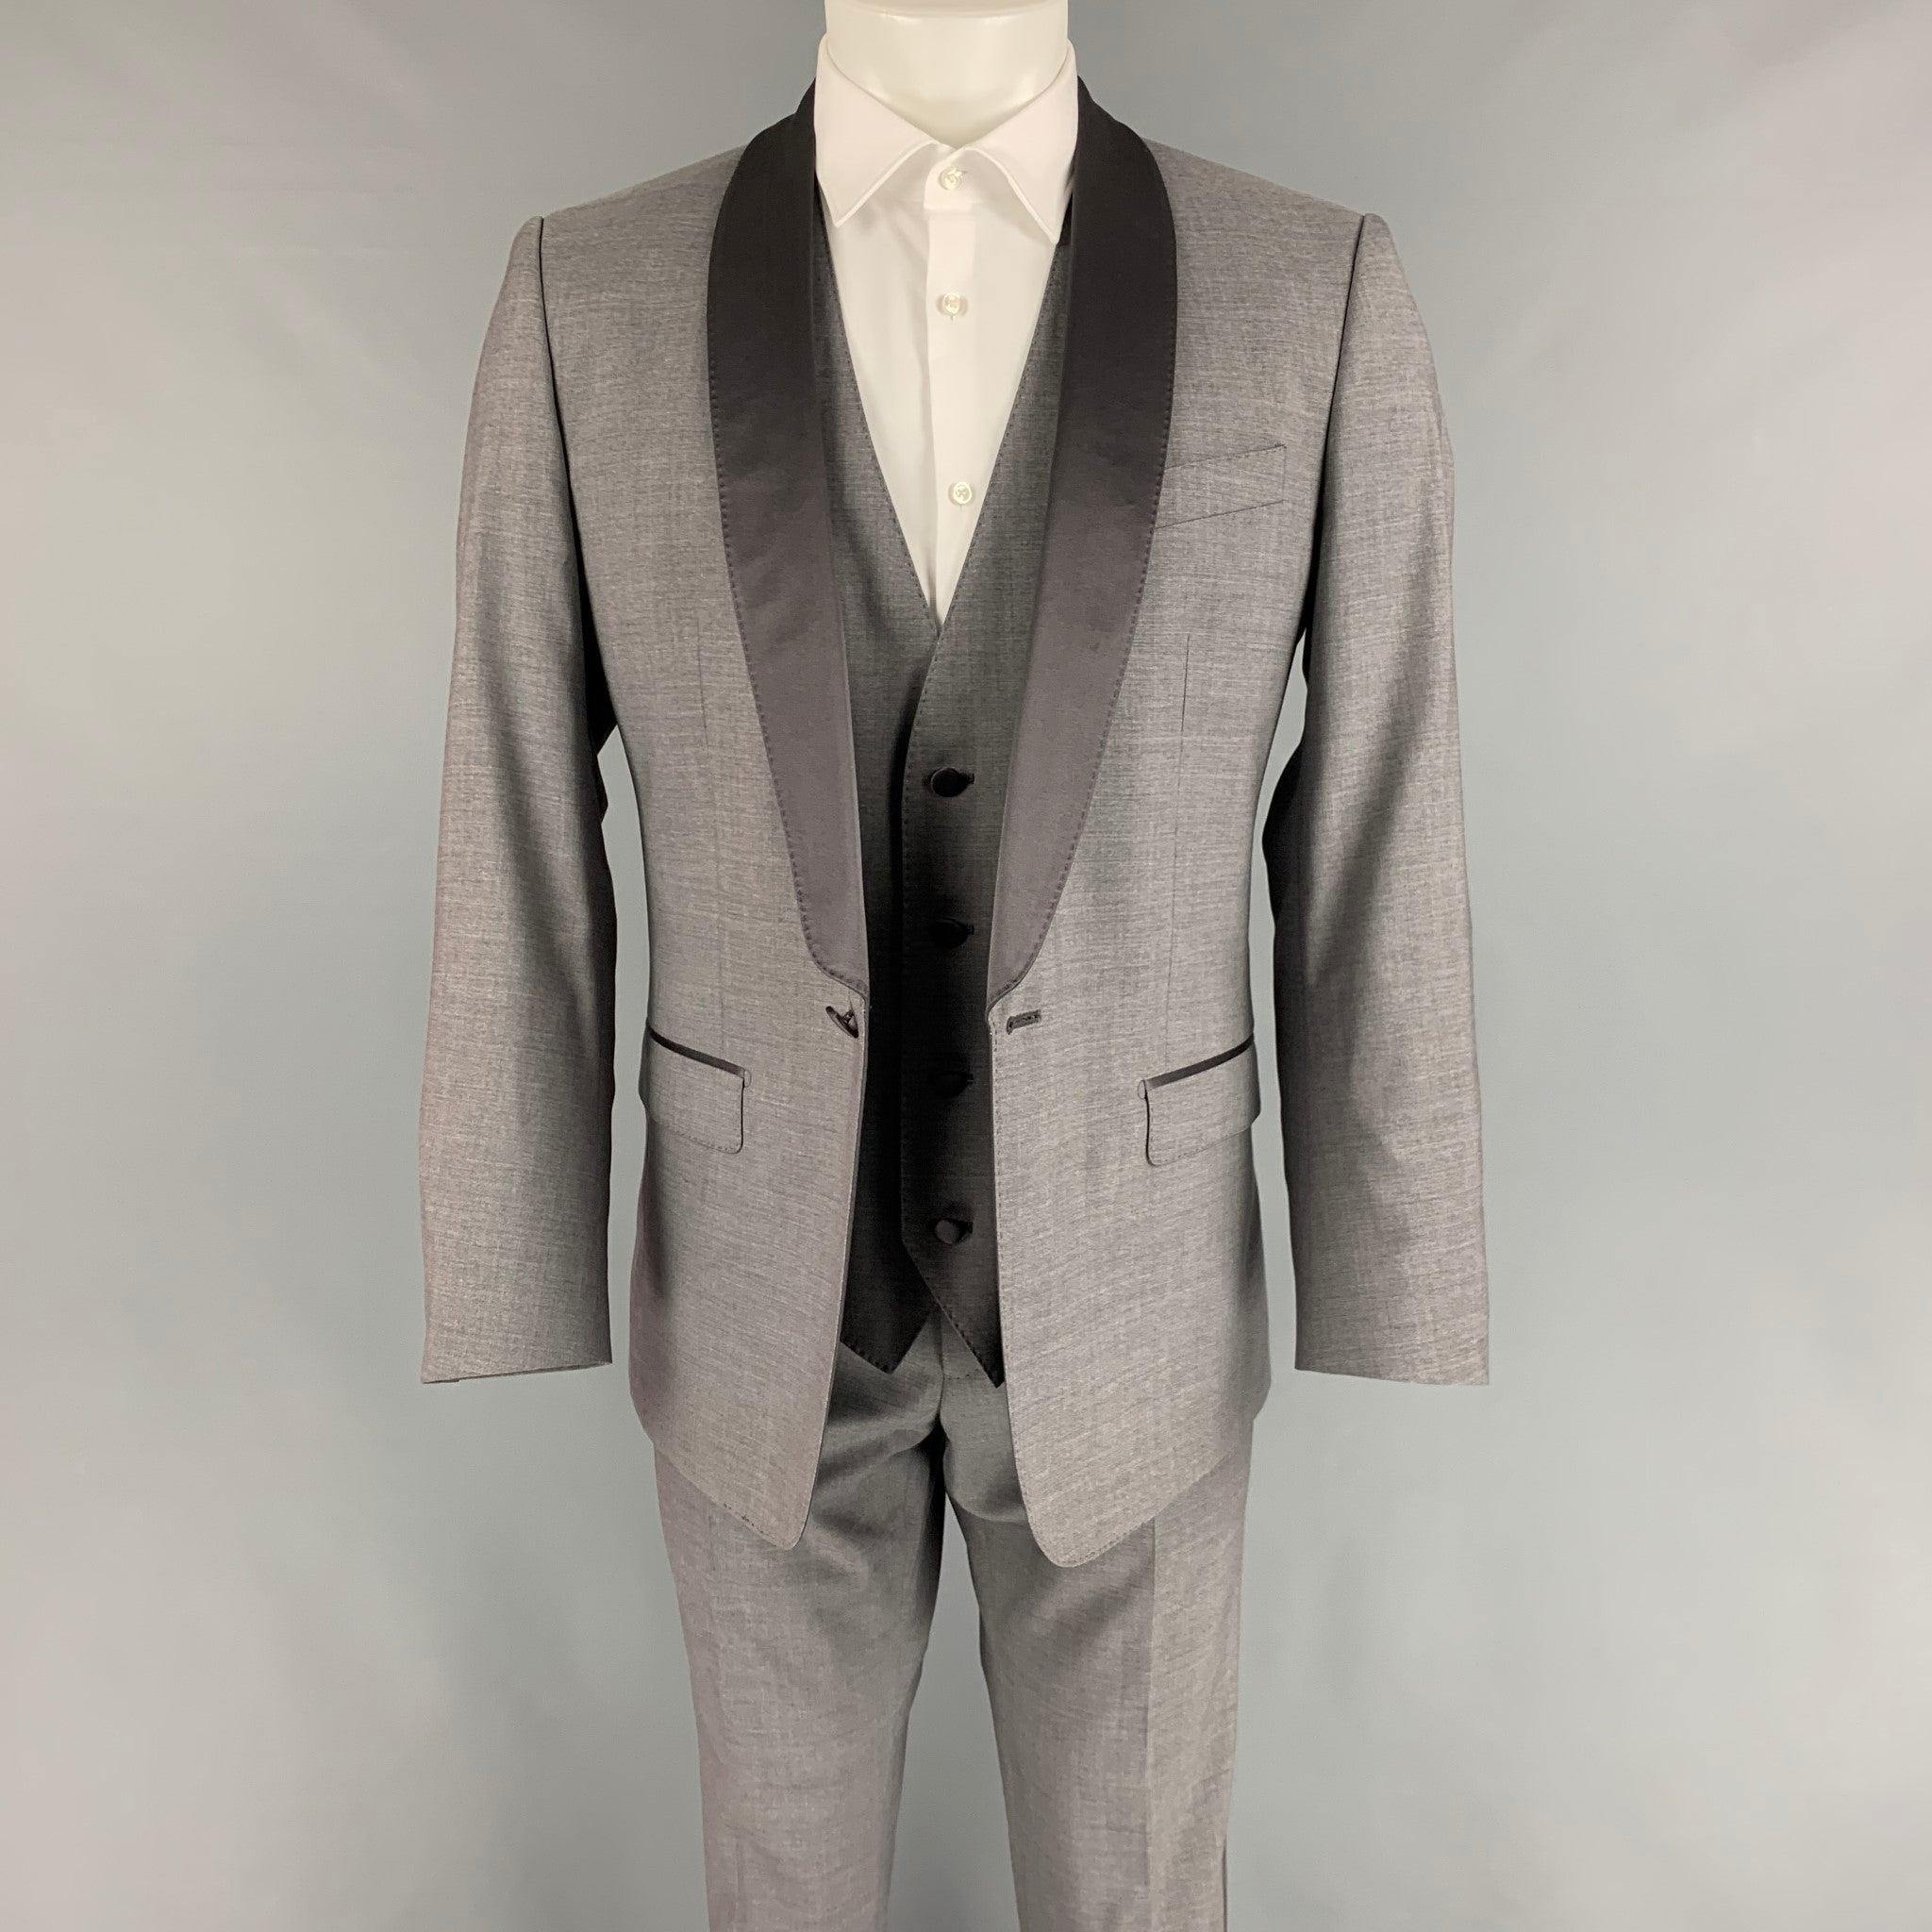 DOLCE & GABBANA 3 Piece
suit comes in a grey wool blend with a full liner and includes a single breasted, single button sport coat with shawl collar and a matching vest & flat front trousers. Made in Italy.New With Tags.  

Marked:   48